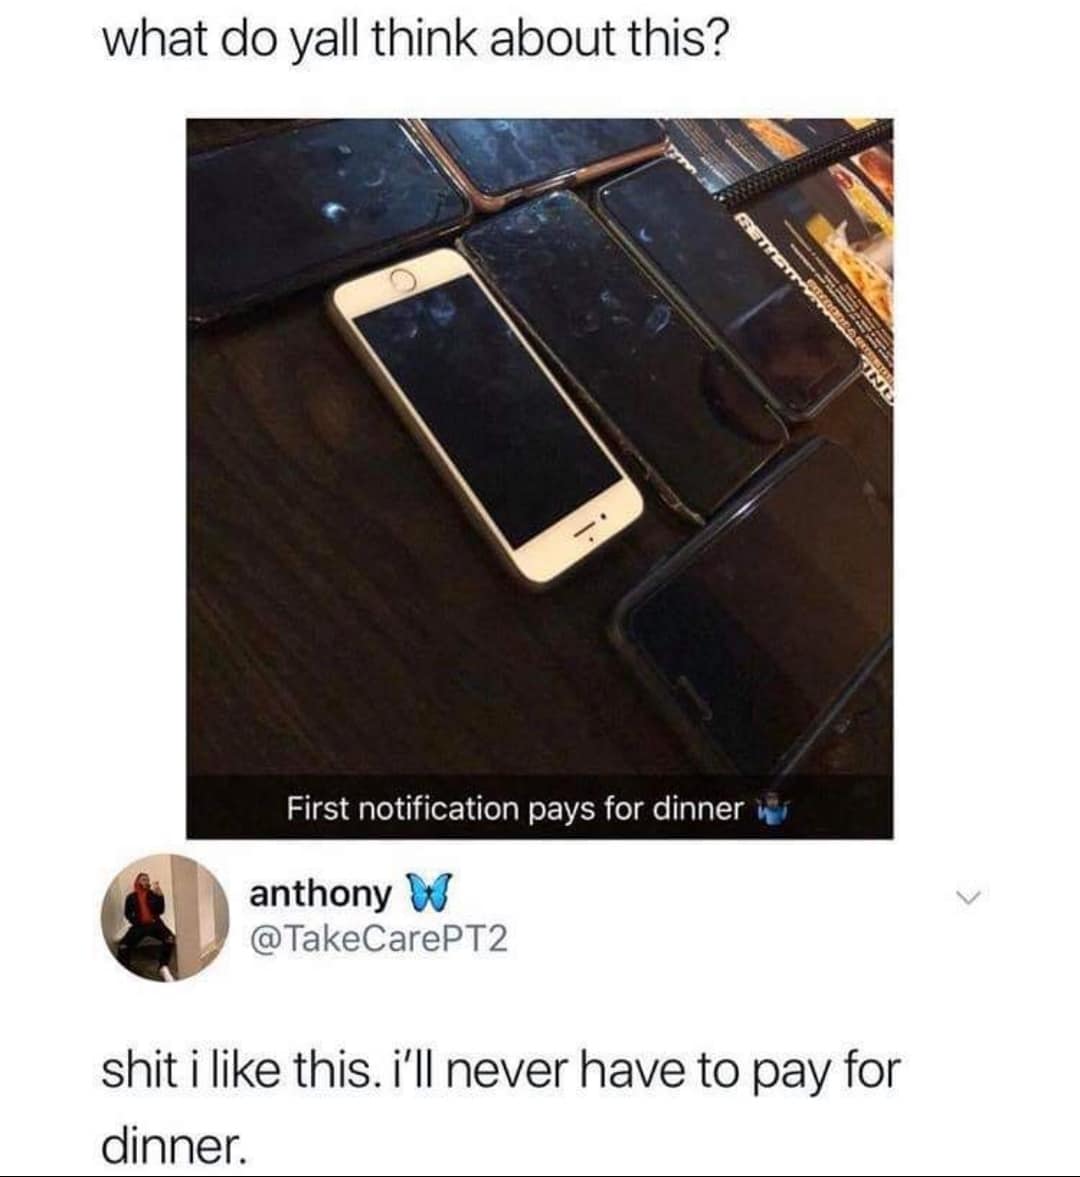 Depression,  depression memes Depression,  text: what do yall think about this? First notification pays for dinner anthony W @TakeCarePT2 shit i like this. i'll never have to pay for dinner. 